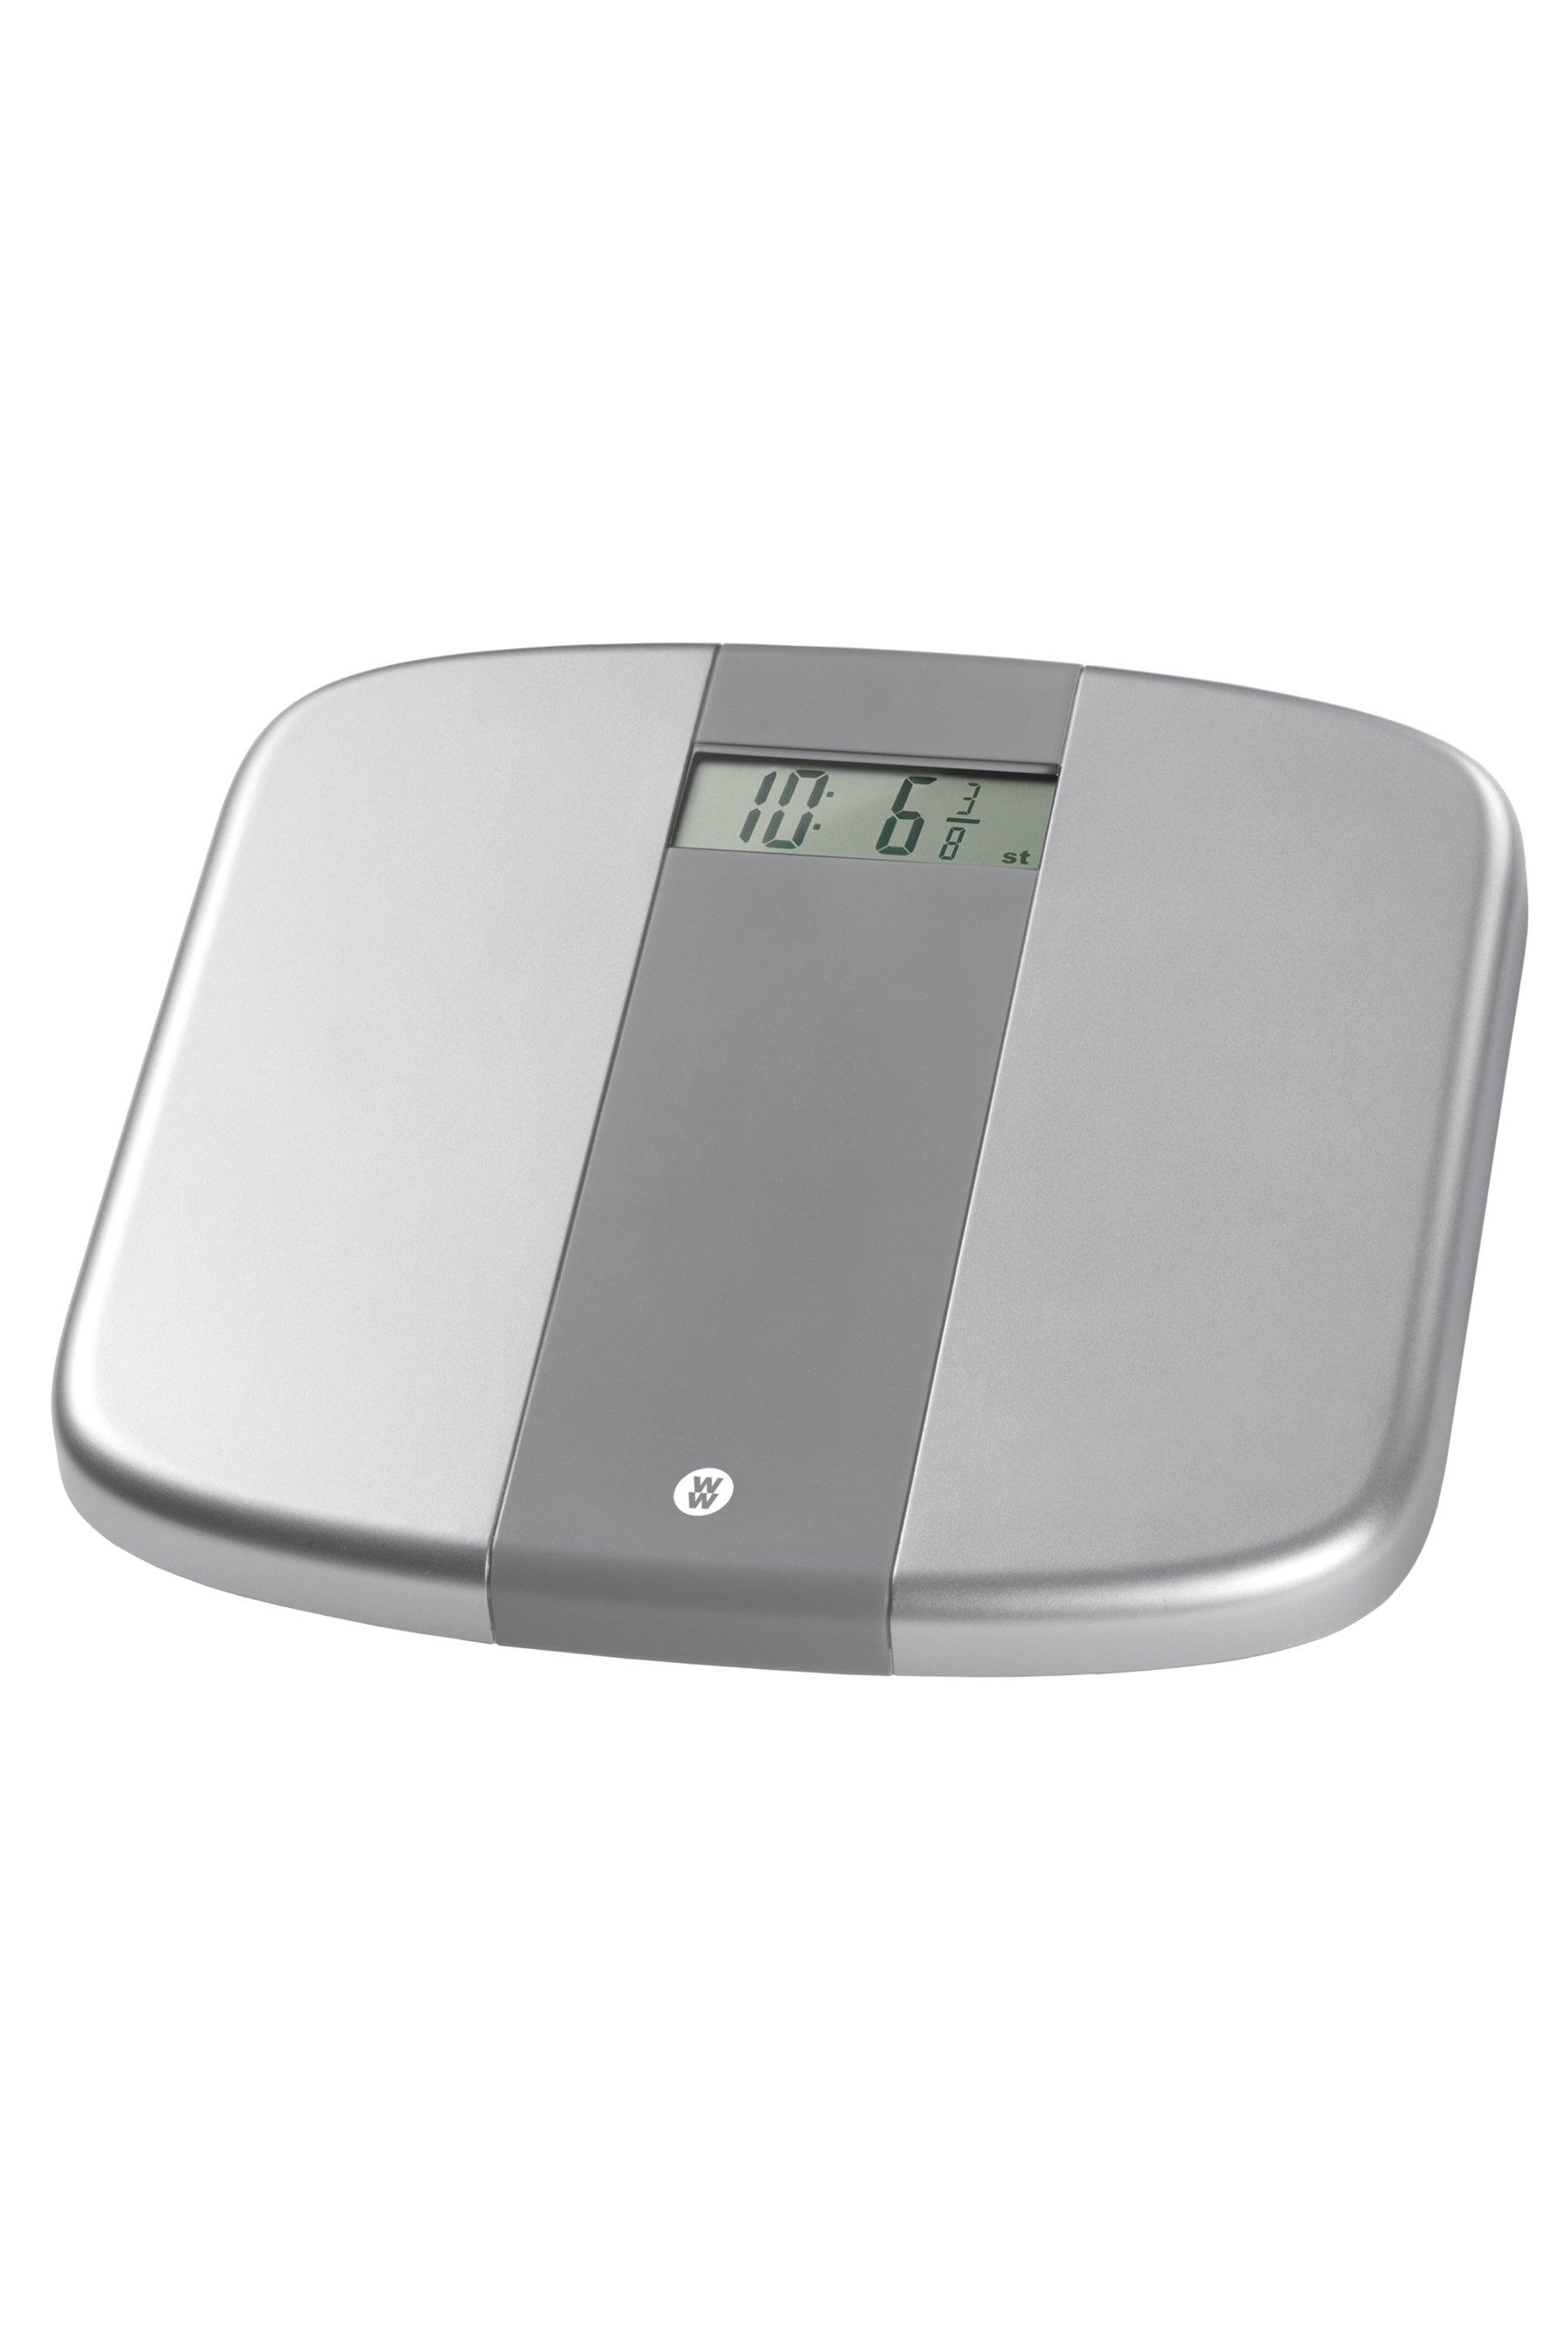 Weight Watchers Designer Electronic Precision Scale 